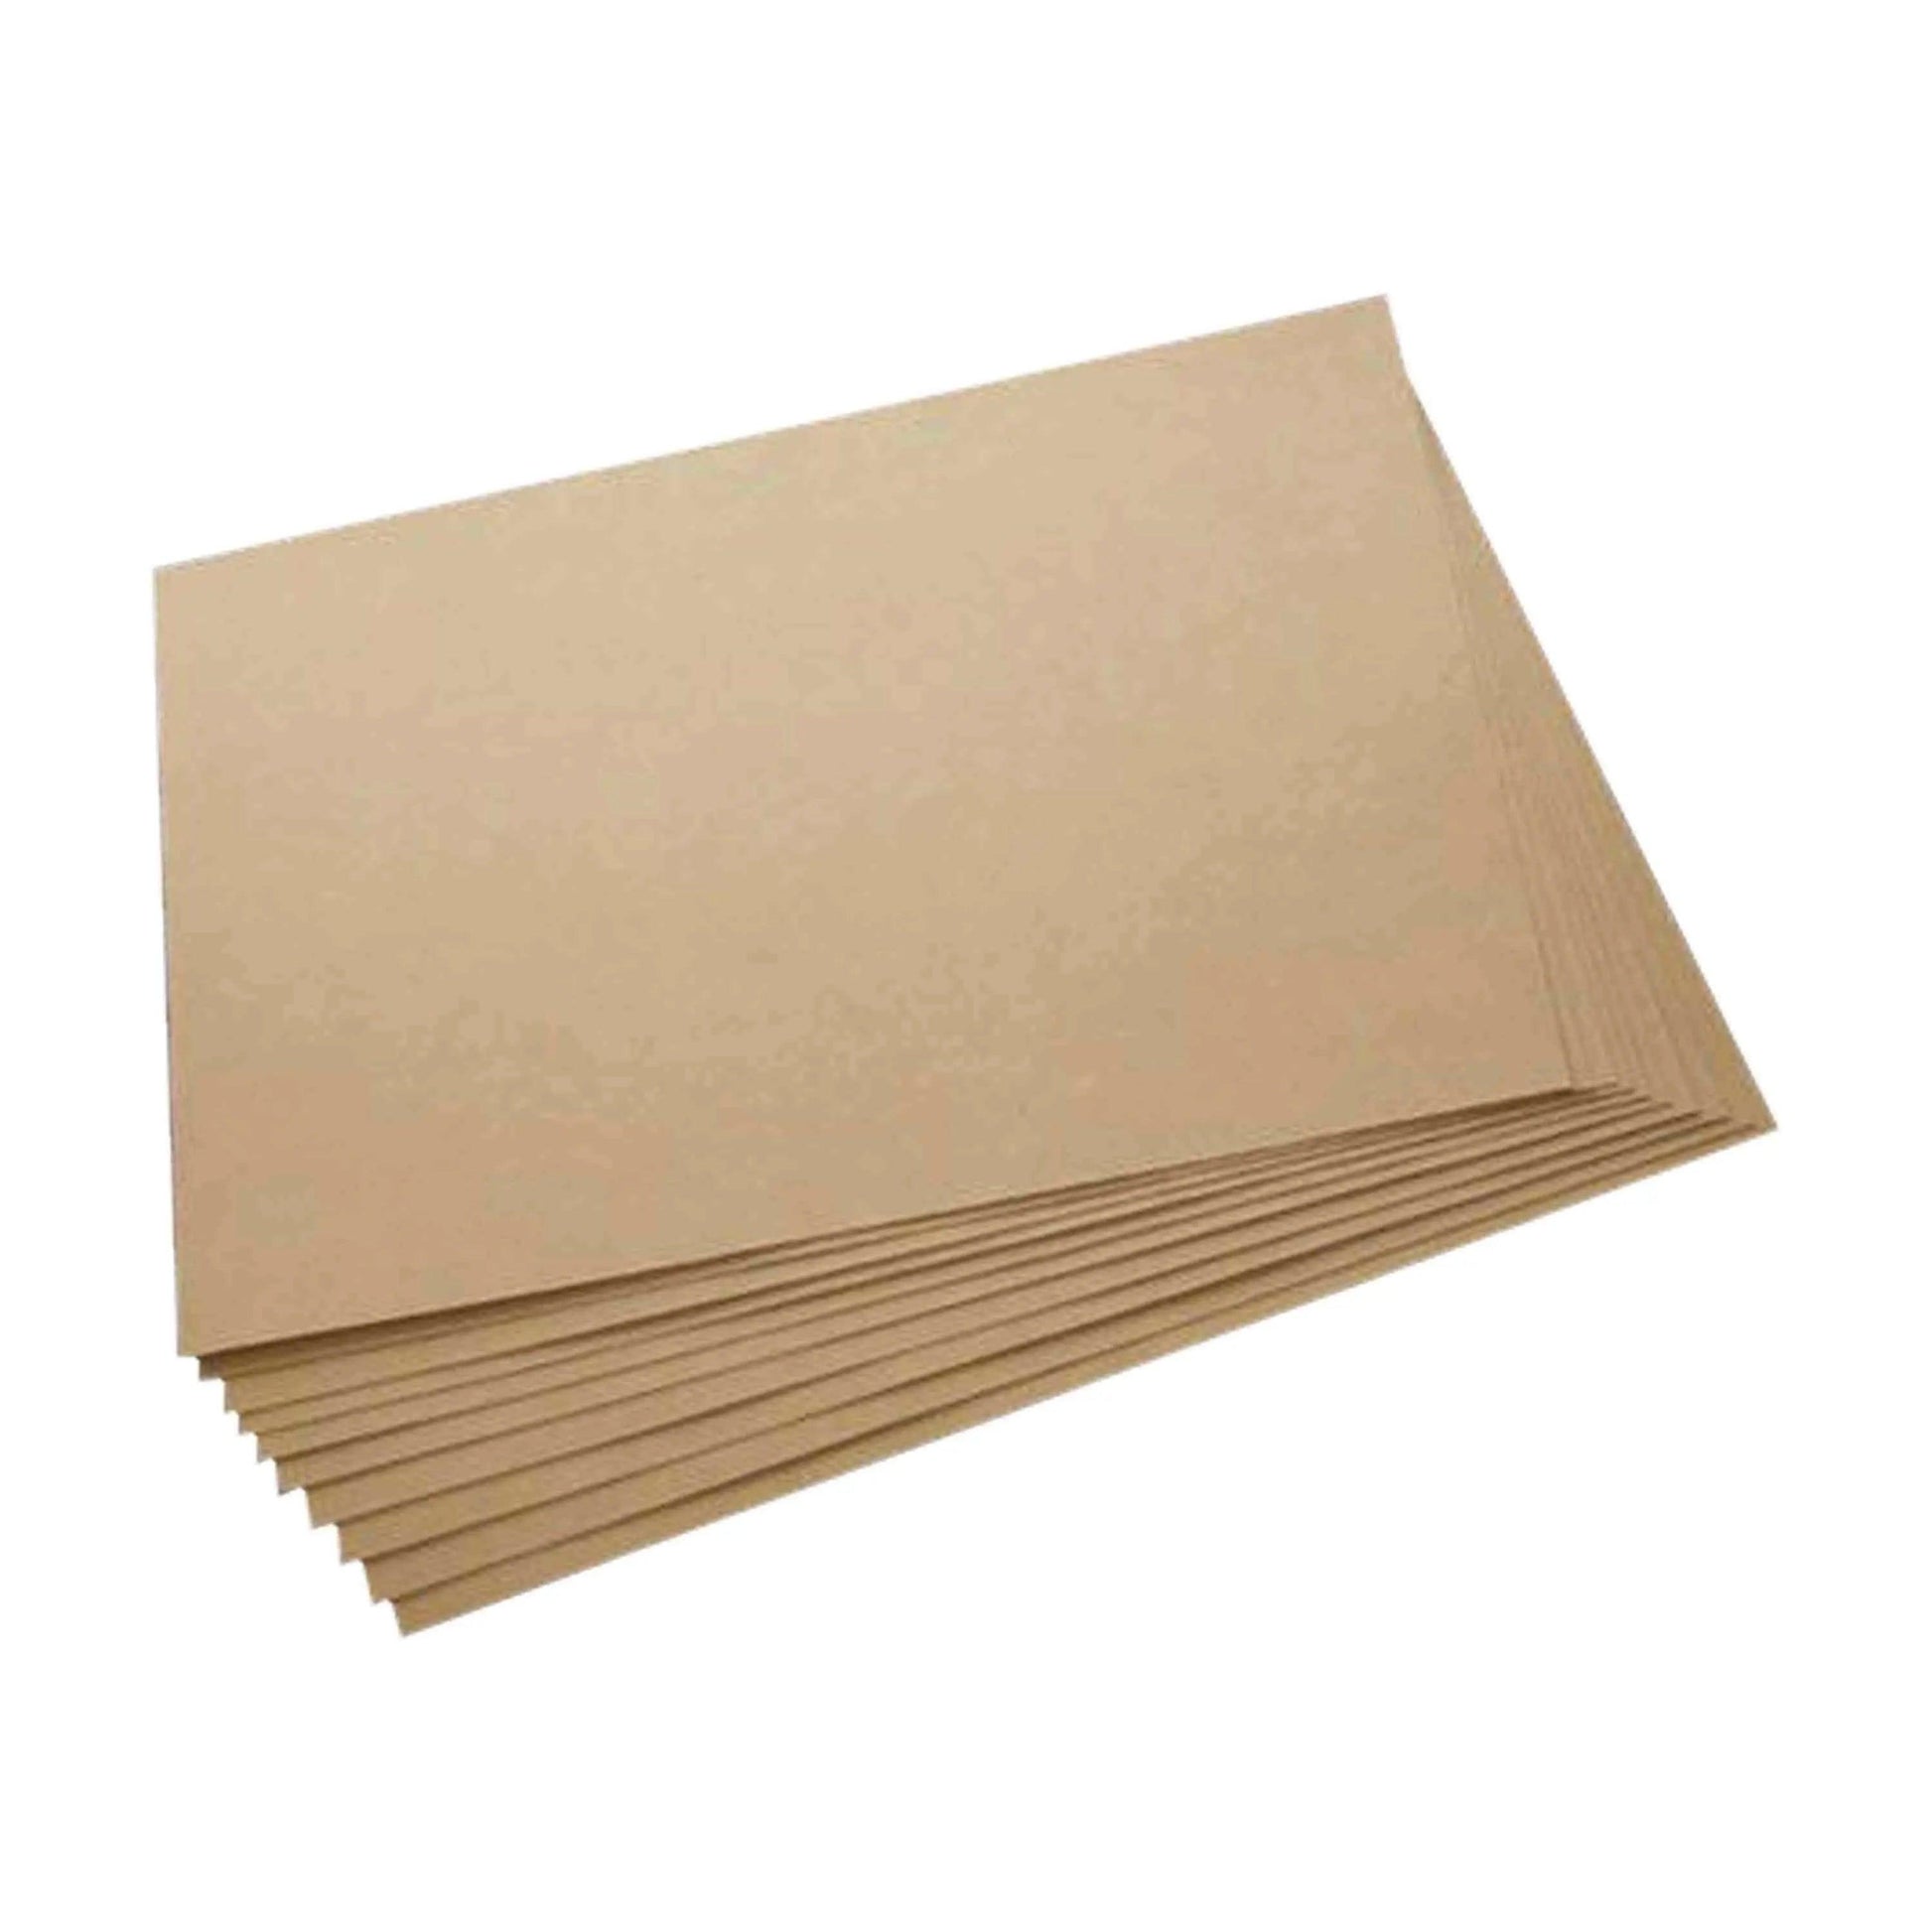 Box Board Sheet The Stationers